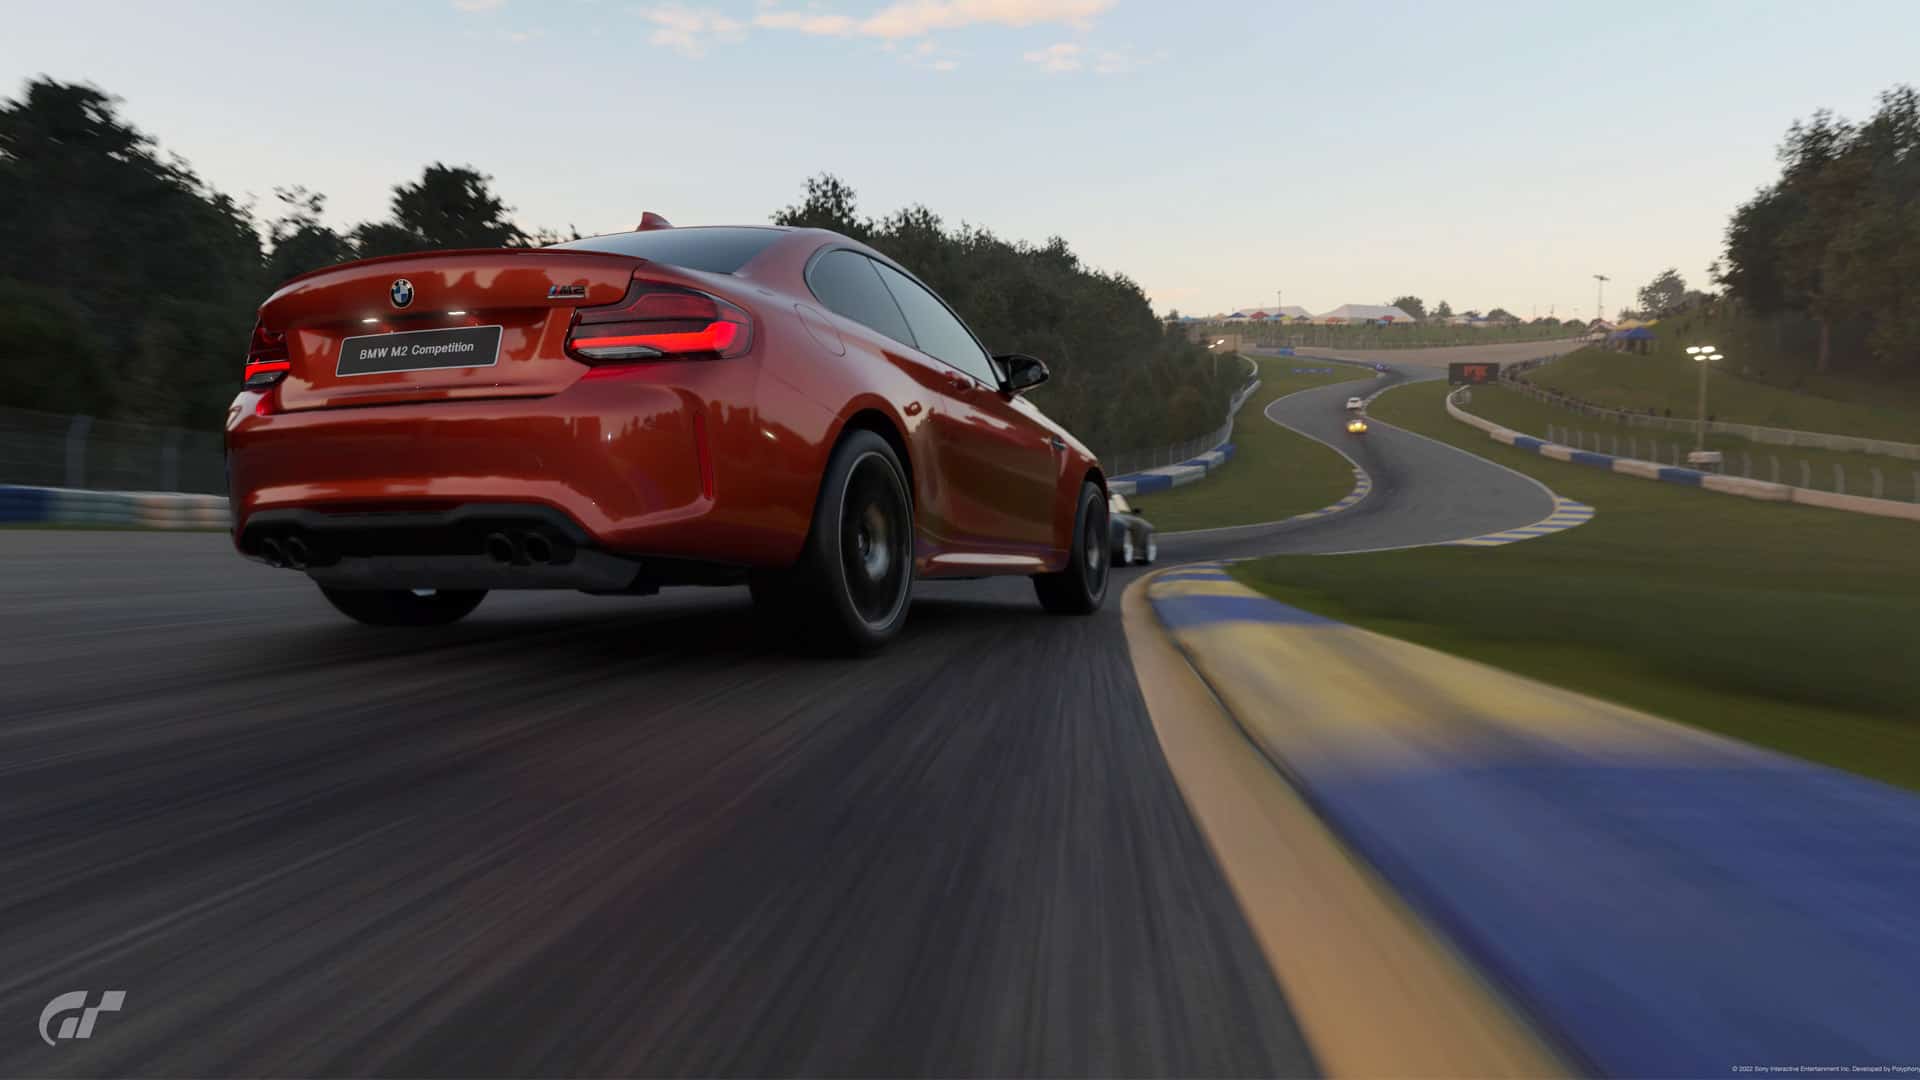 Gran Turismo 7 Update 1.26 Adding New Track and 3 More Cars